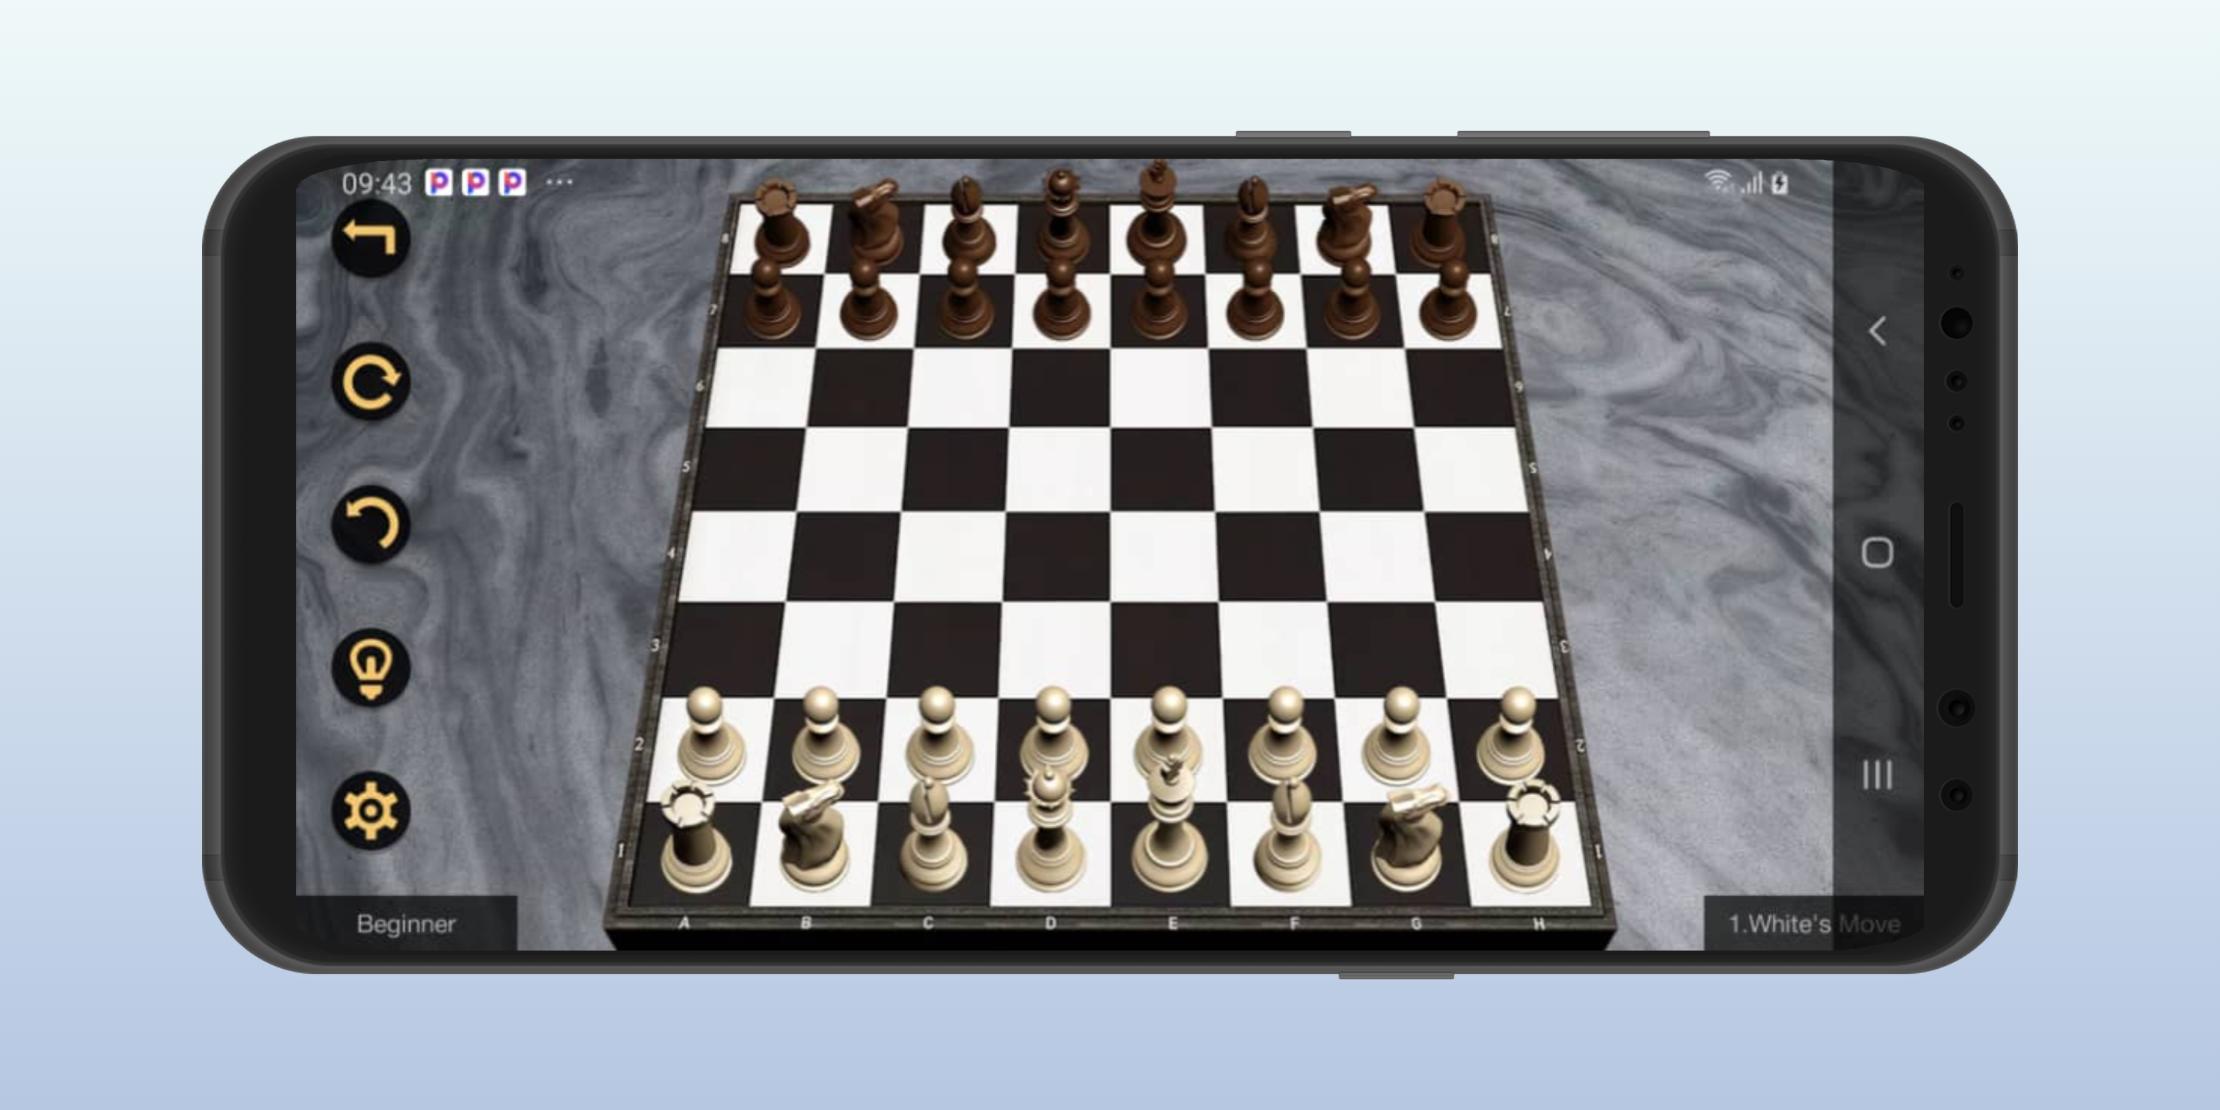 About: ♟️Chess Titans: Free Offline Game (Google Play version